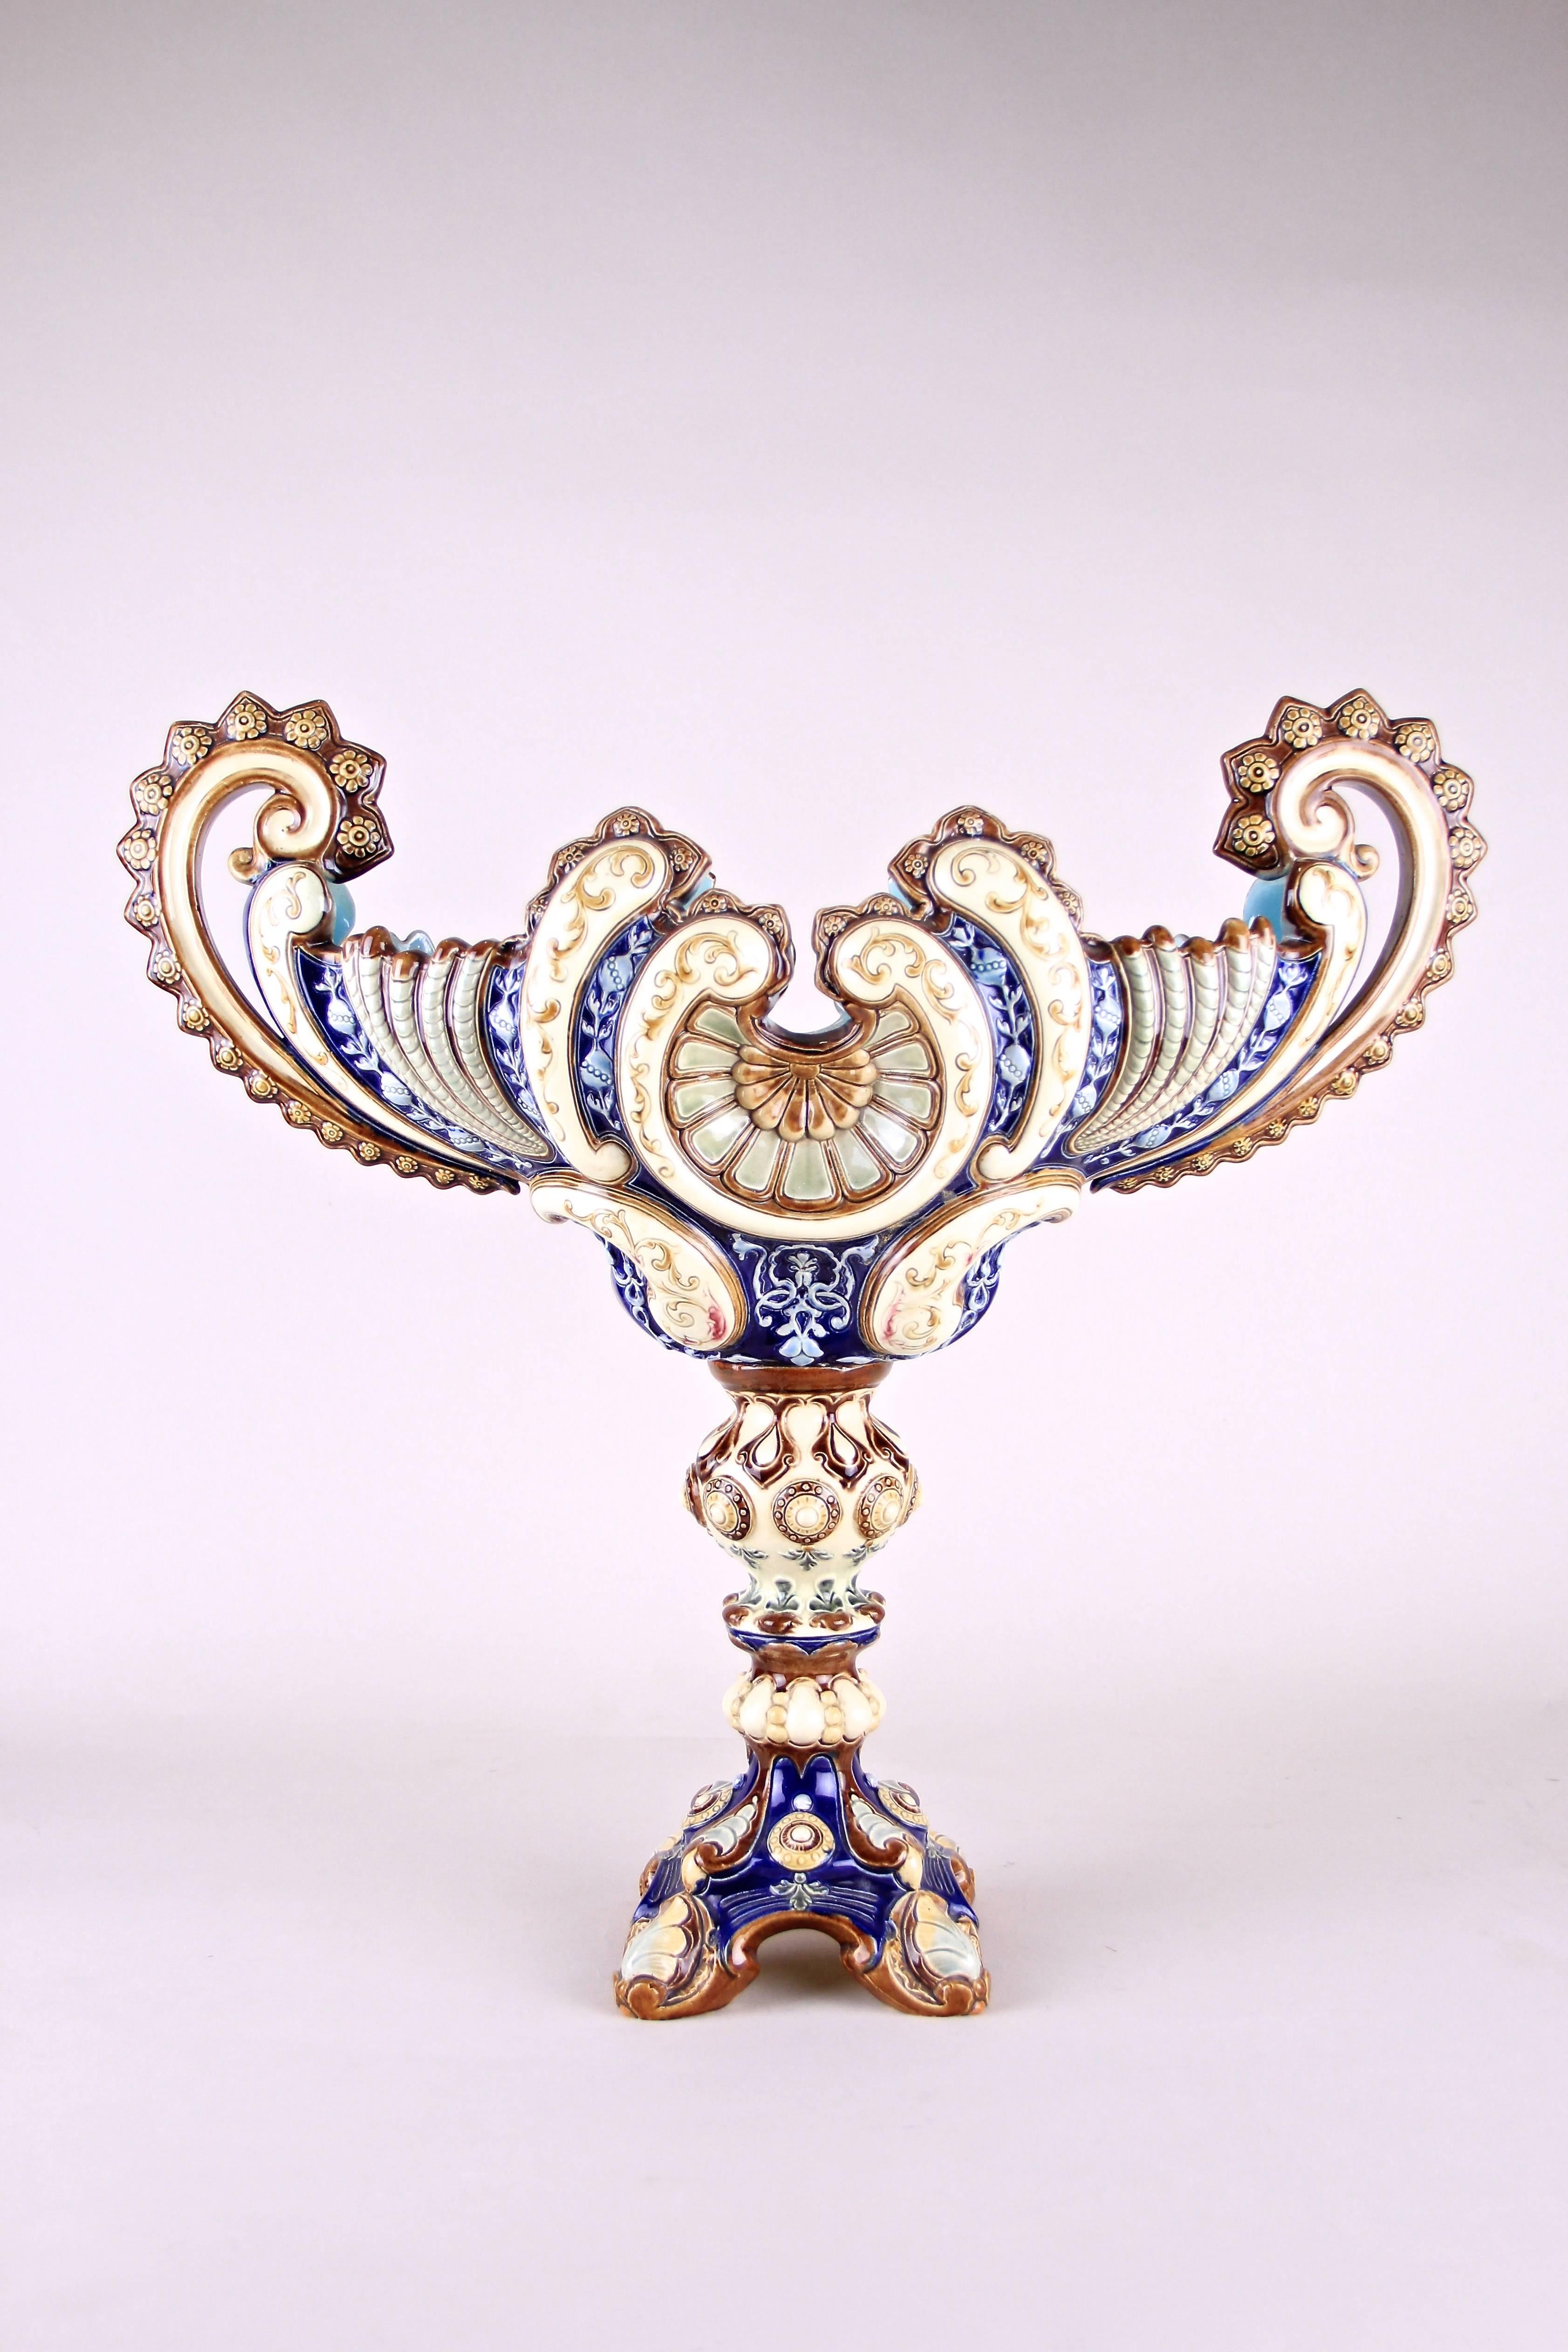 Hand-Painted Large Majolica Centrepiece by Wilhelm Schiller & Son, Bohemia, circa 1890